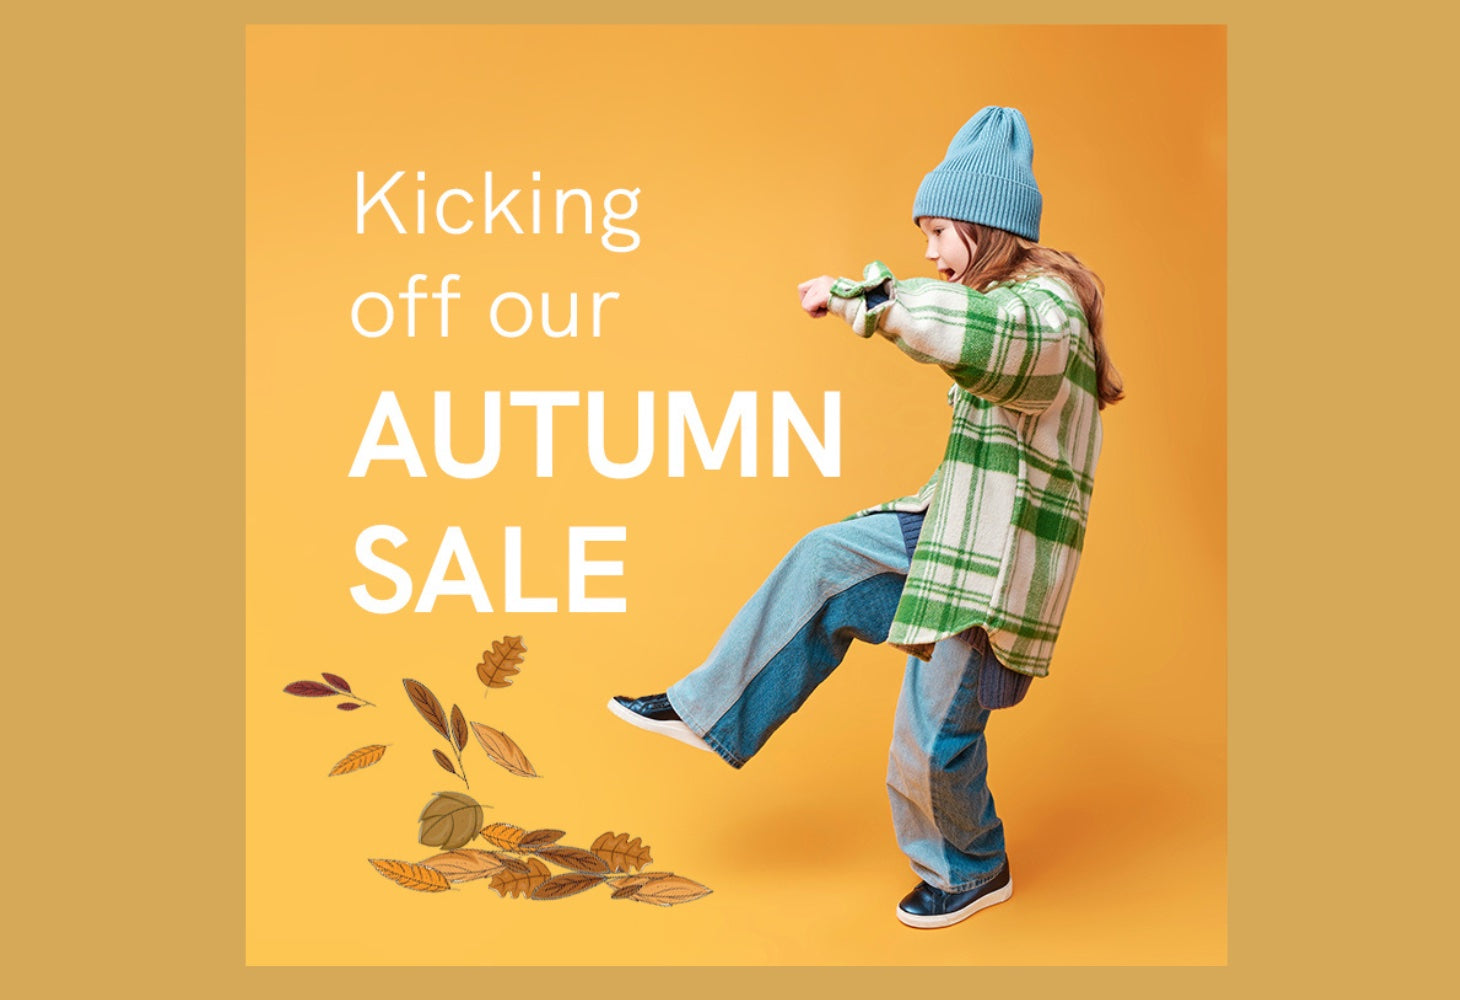 There's an autumn sale going on right now with up to 80% off on kids interiors! If you're looking to spruce up your child's room or create a cosy space for them to relax in, now is the perfect time to do it. Don't miss out on these amazing deals! 